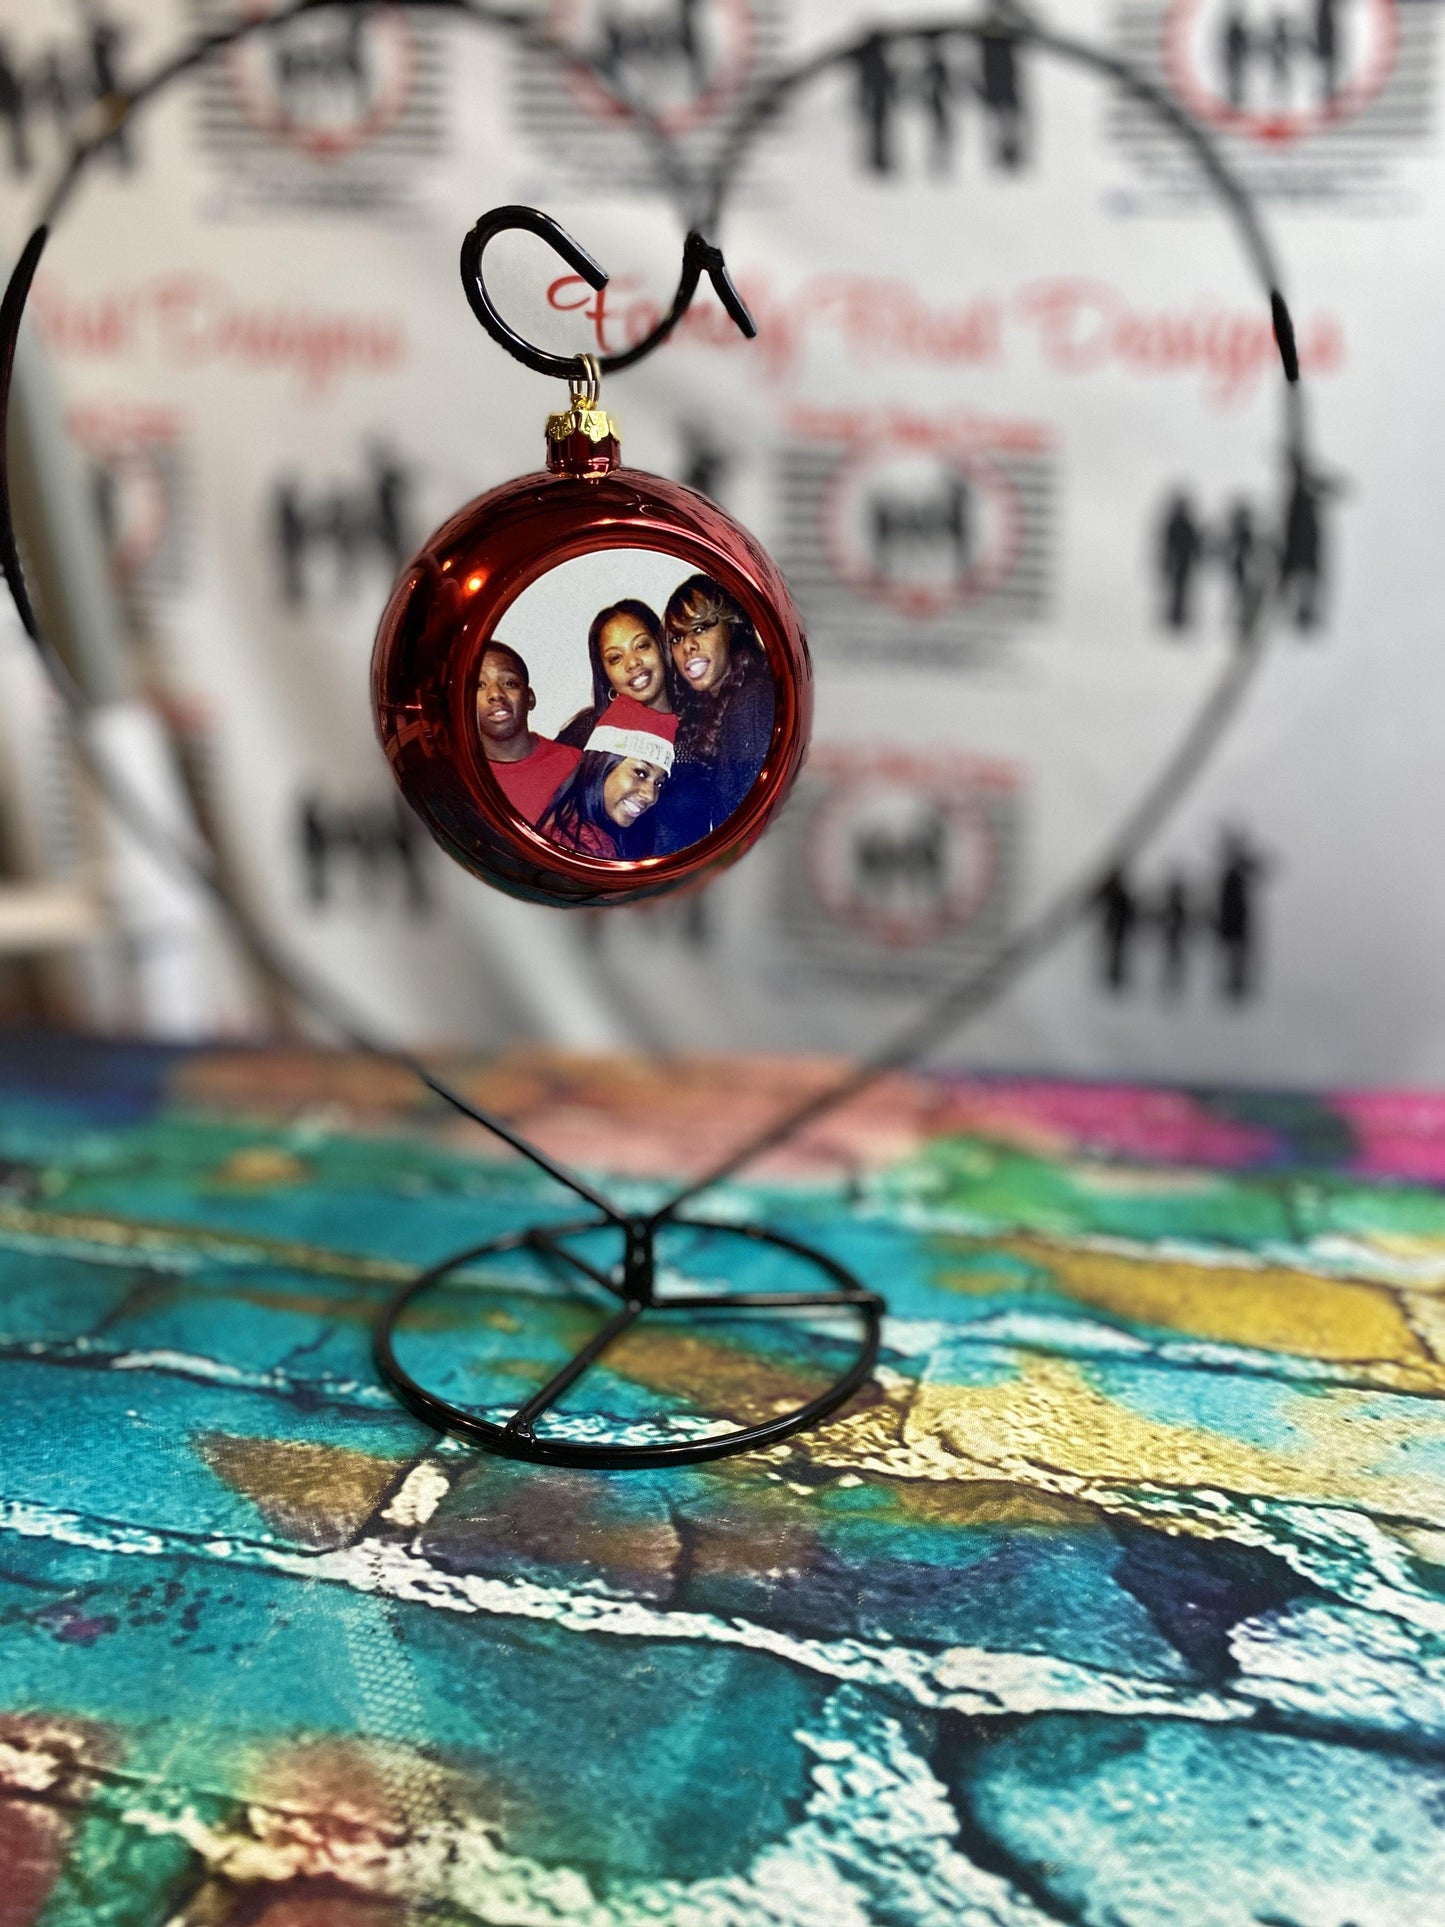 3” Photo Holiday Bulb Ornament - Family First Designs LLC